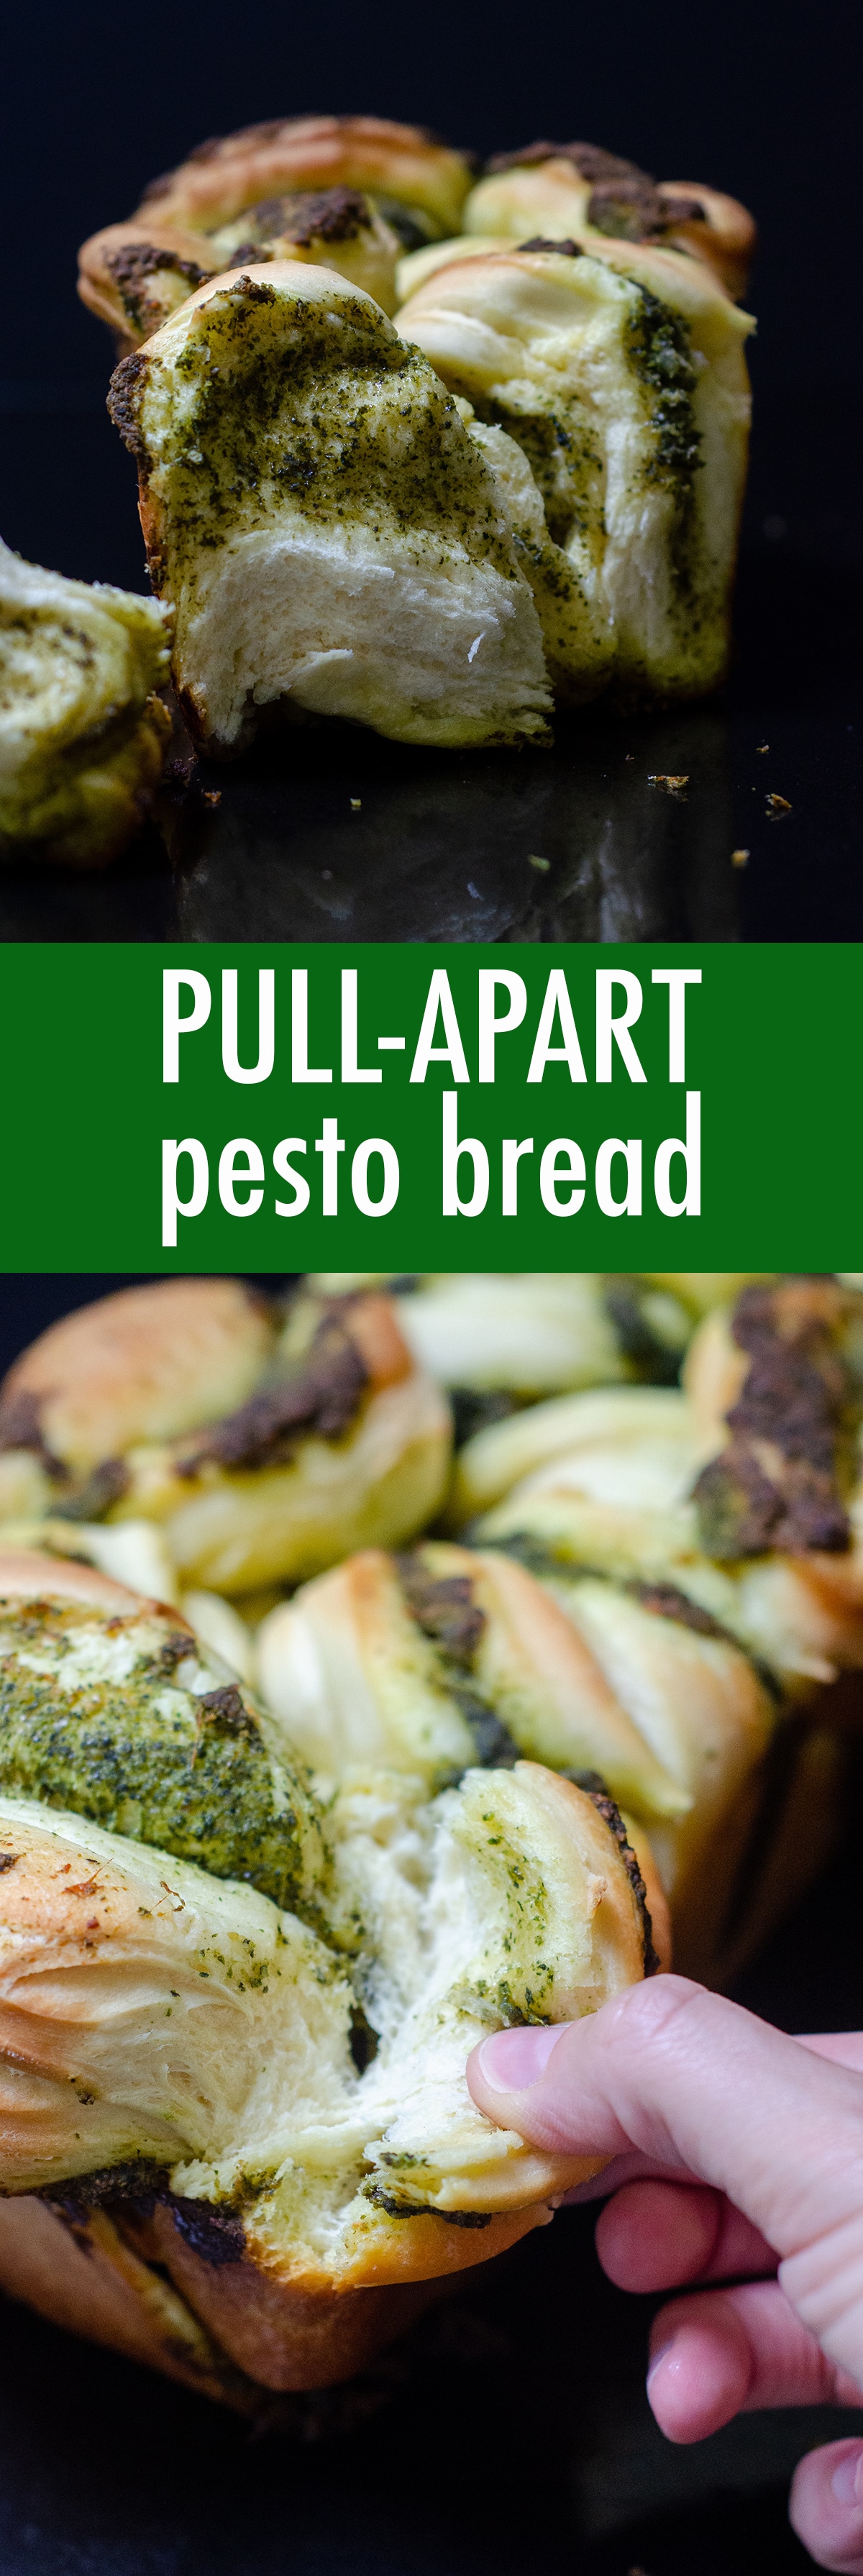 Pull-Apart Pesto Bread: Soft and fluffy pull-apart bread filled with zesty, herbed pesto. via @frshaprilflours